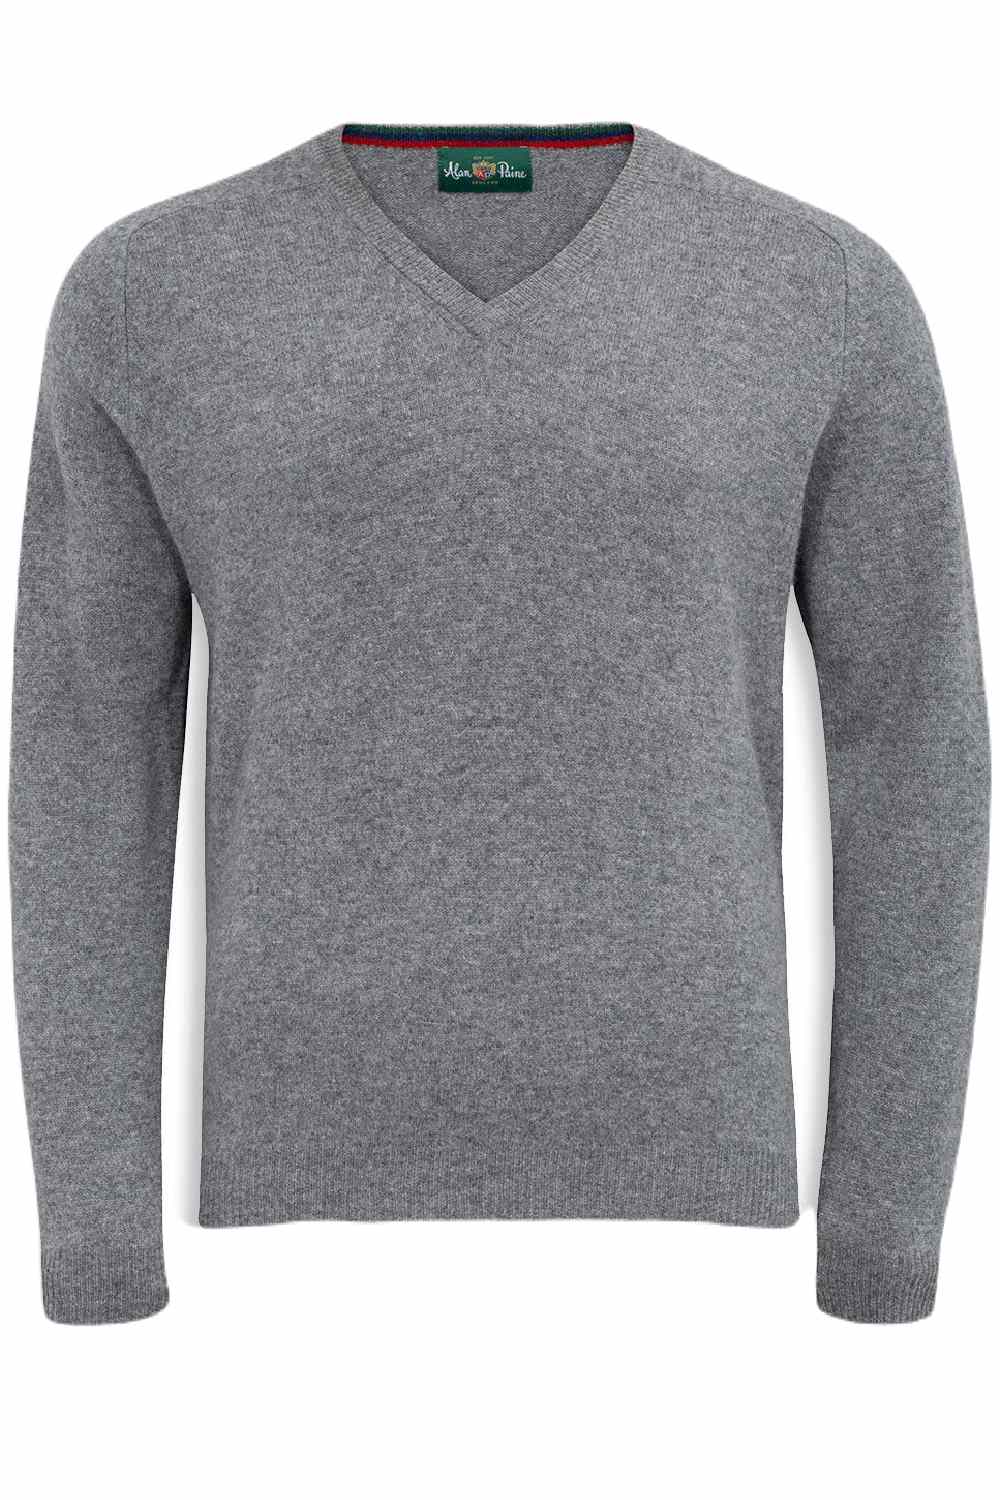 Alan Paine Streetly Lambswool V Neck Jumper in Grey Mix 